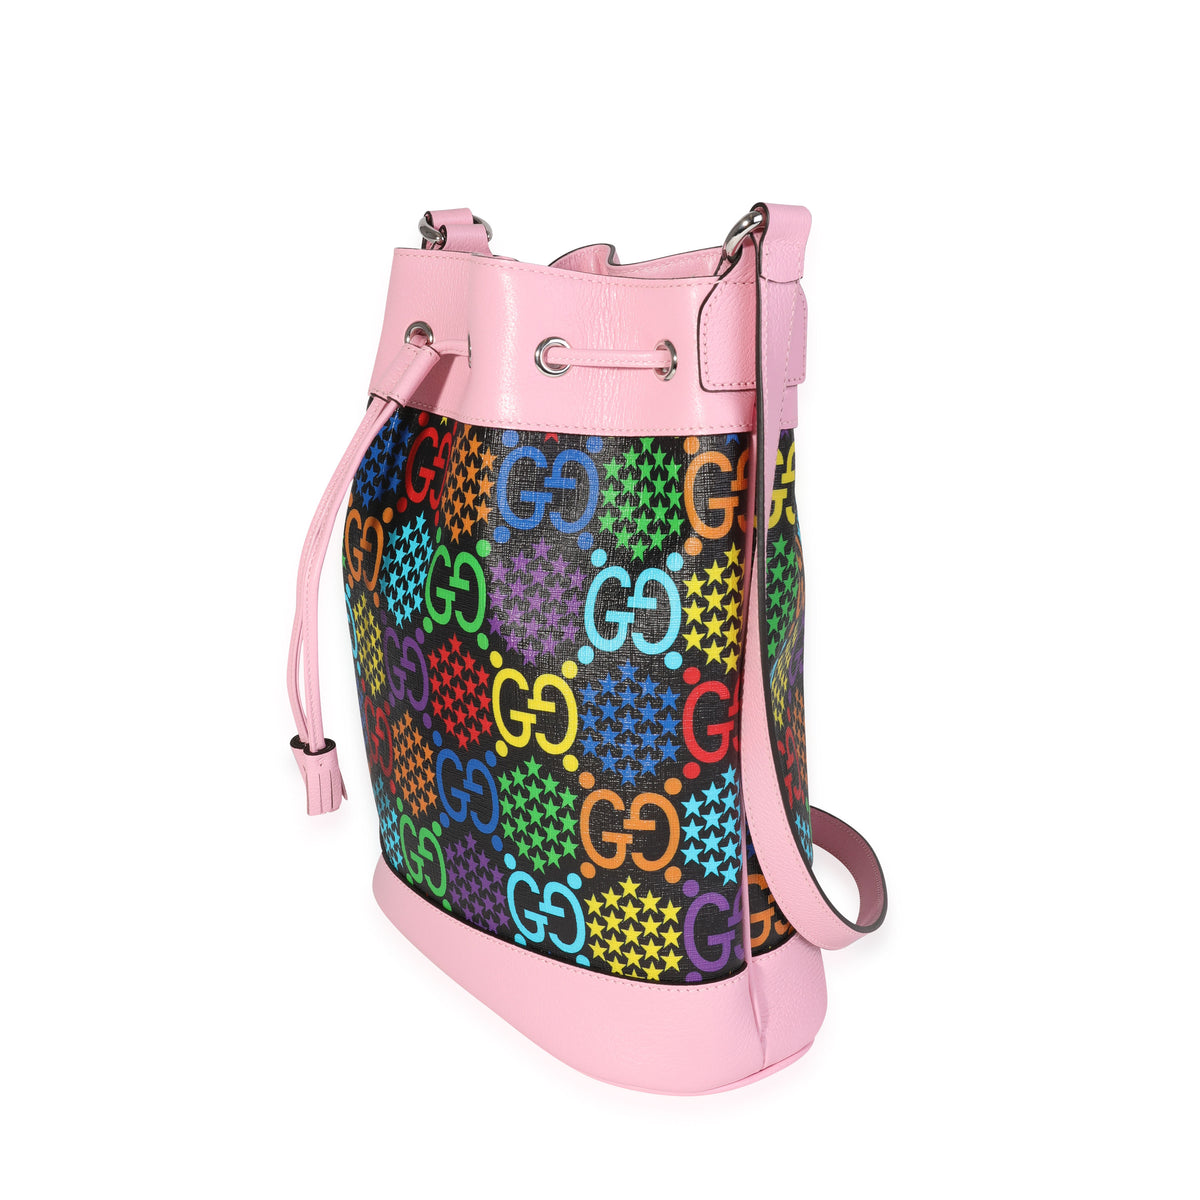 Multicolor Coated Canvas & Pink Leather Psychedelic Bucket Bag